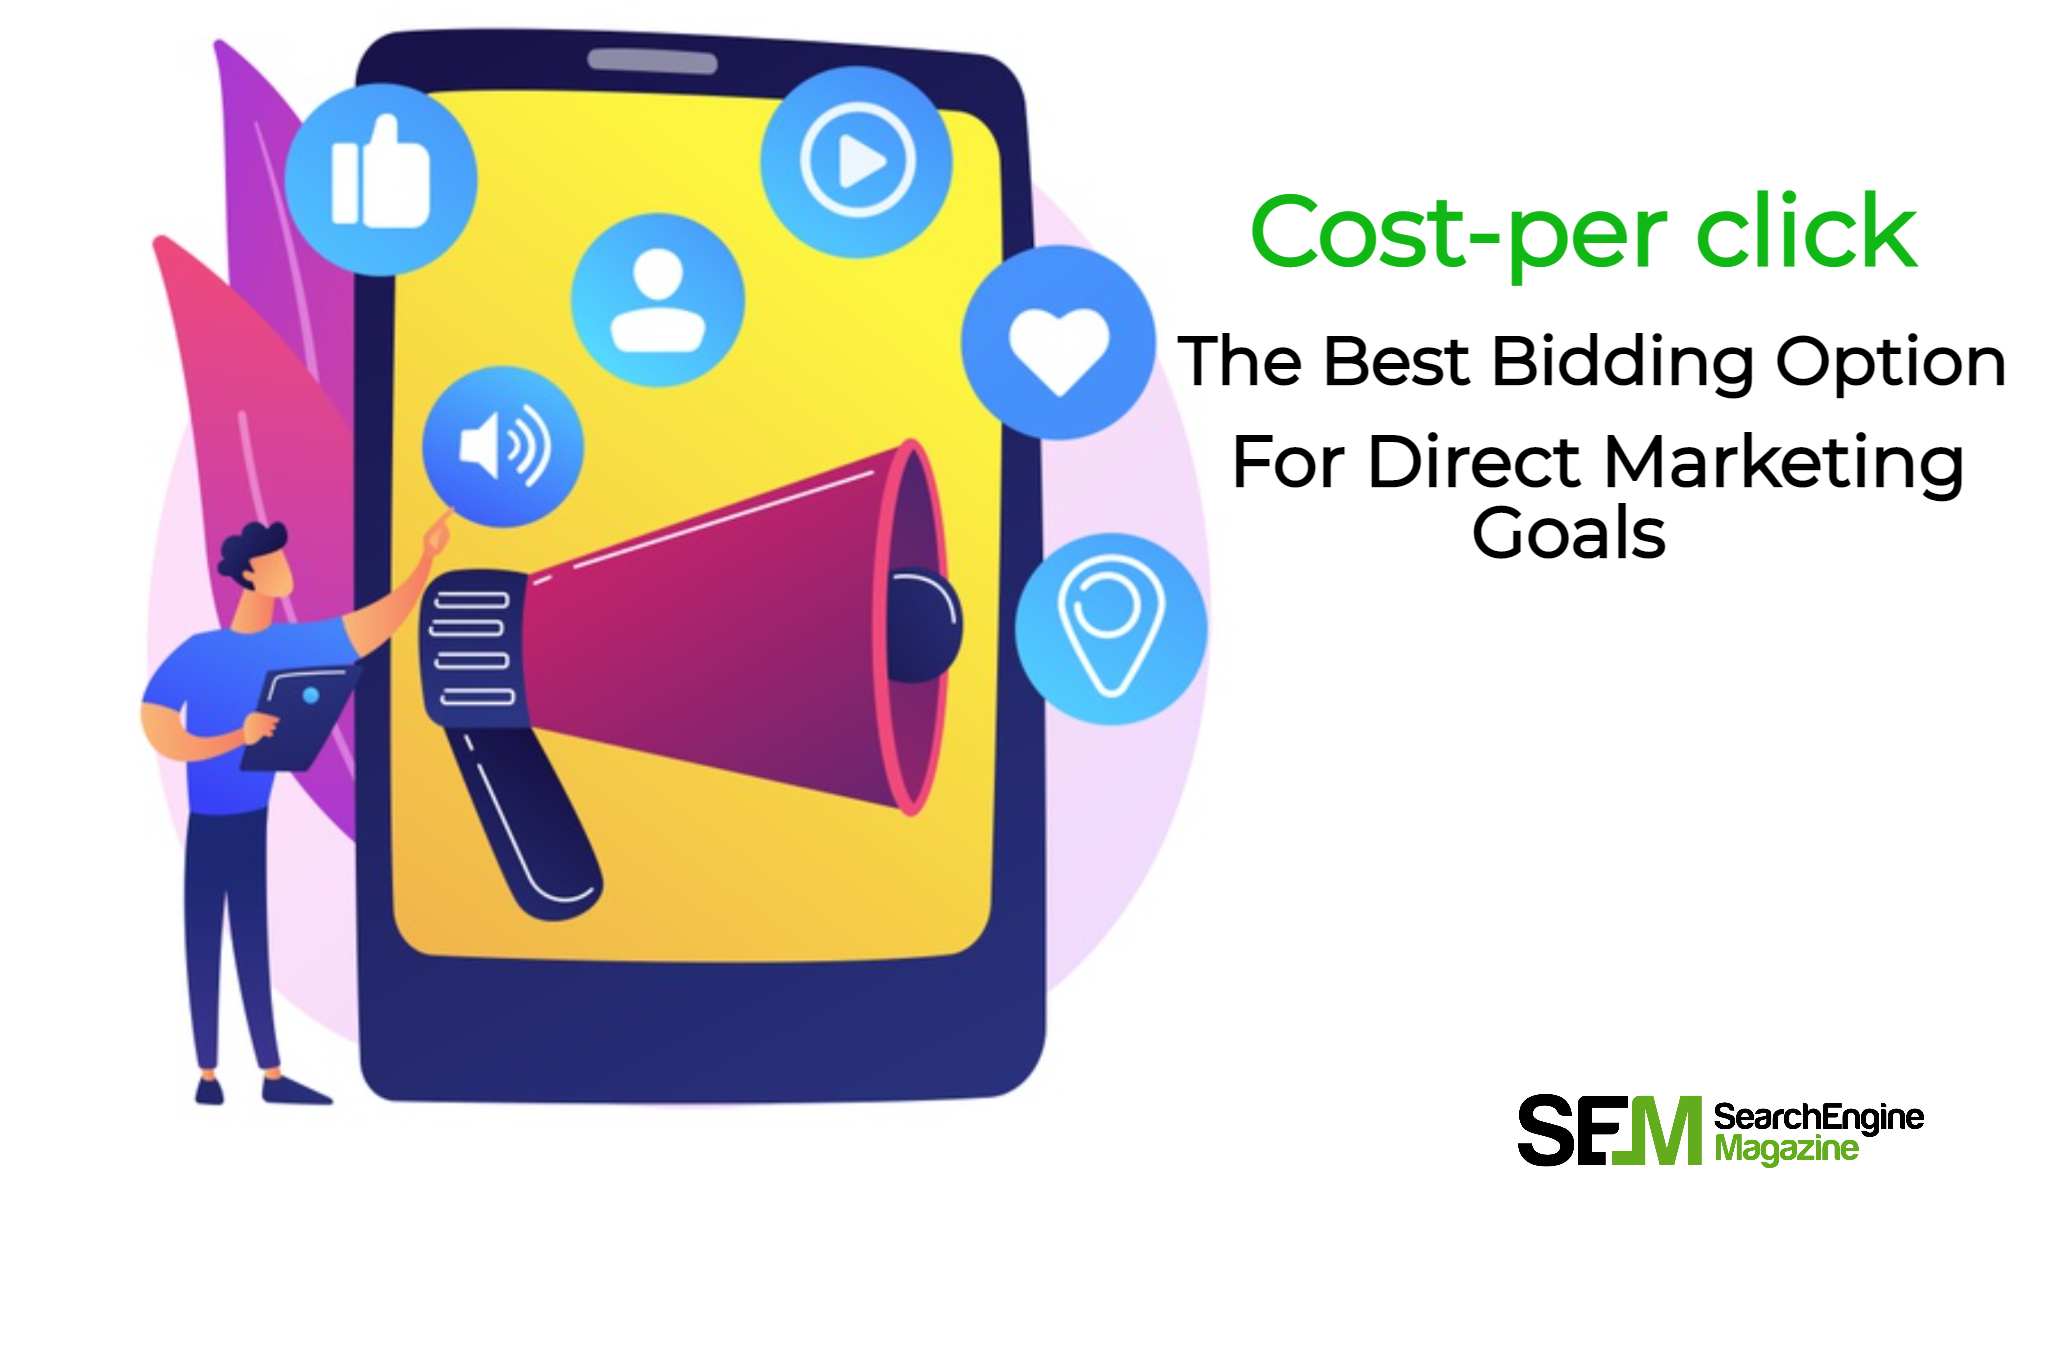 Which bidding option is best suited for an advertiser focused on direct response marketing goals